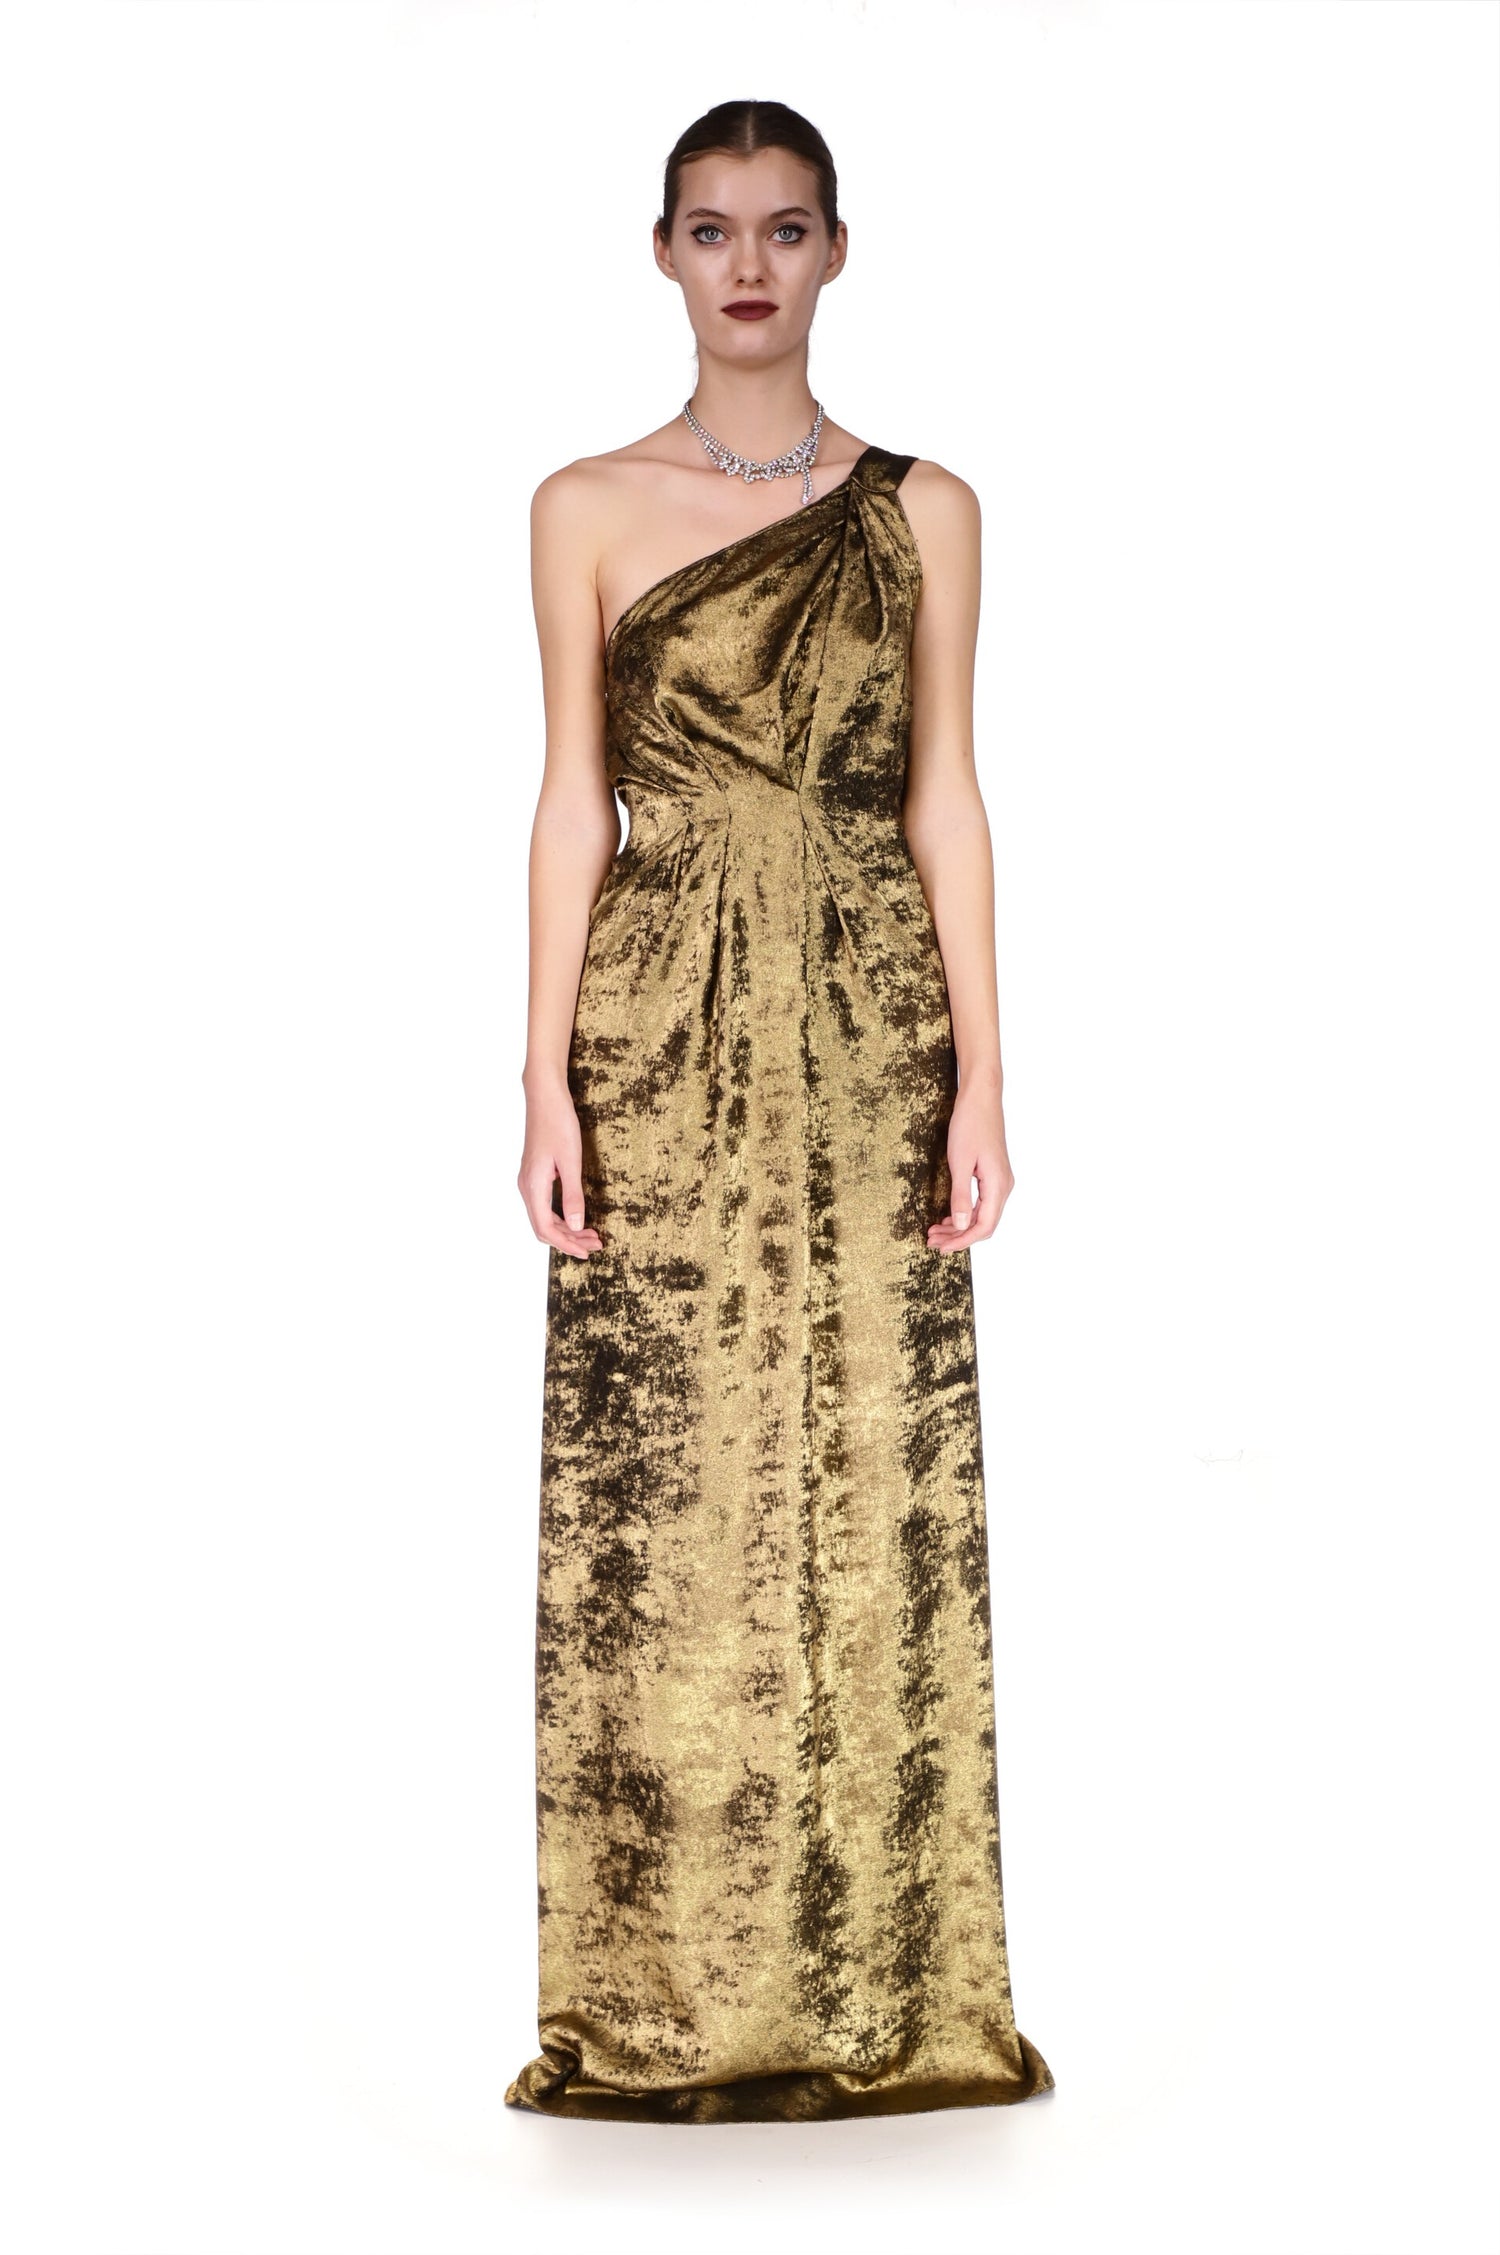 'PYRITE' ONE SHOULDER GOWN - DRESSES - Libertine